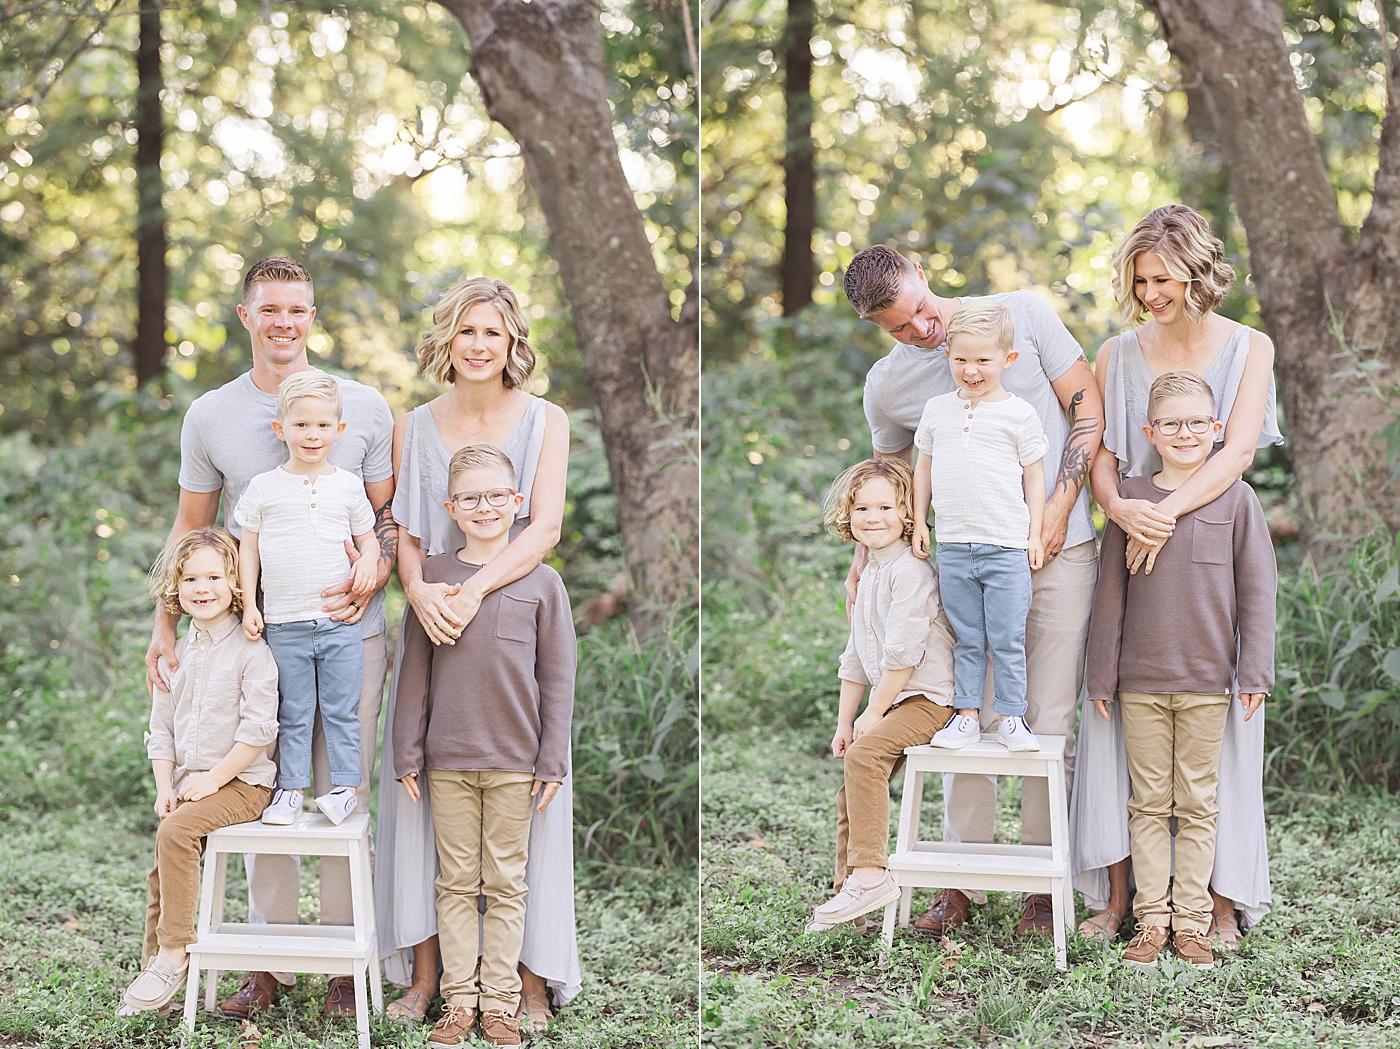 Outdoor family session in Houston Heights. Photos by Fresh Light Photography